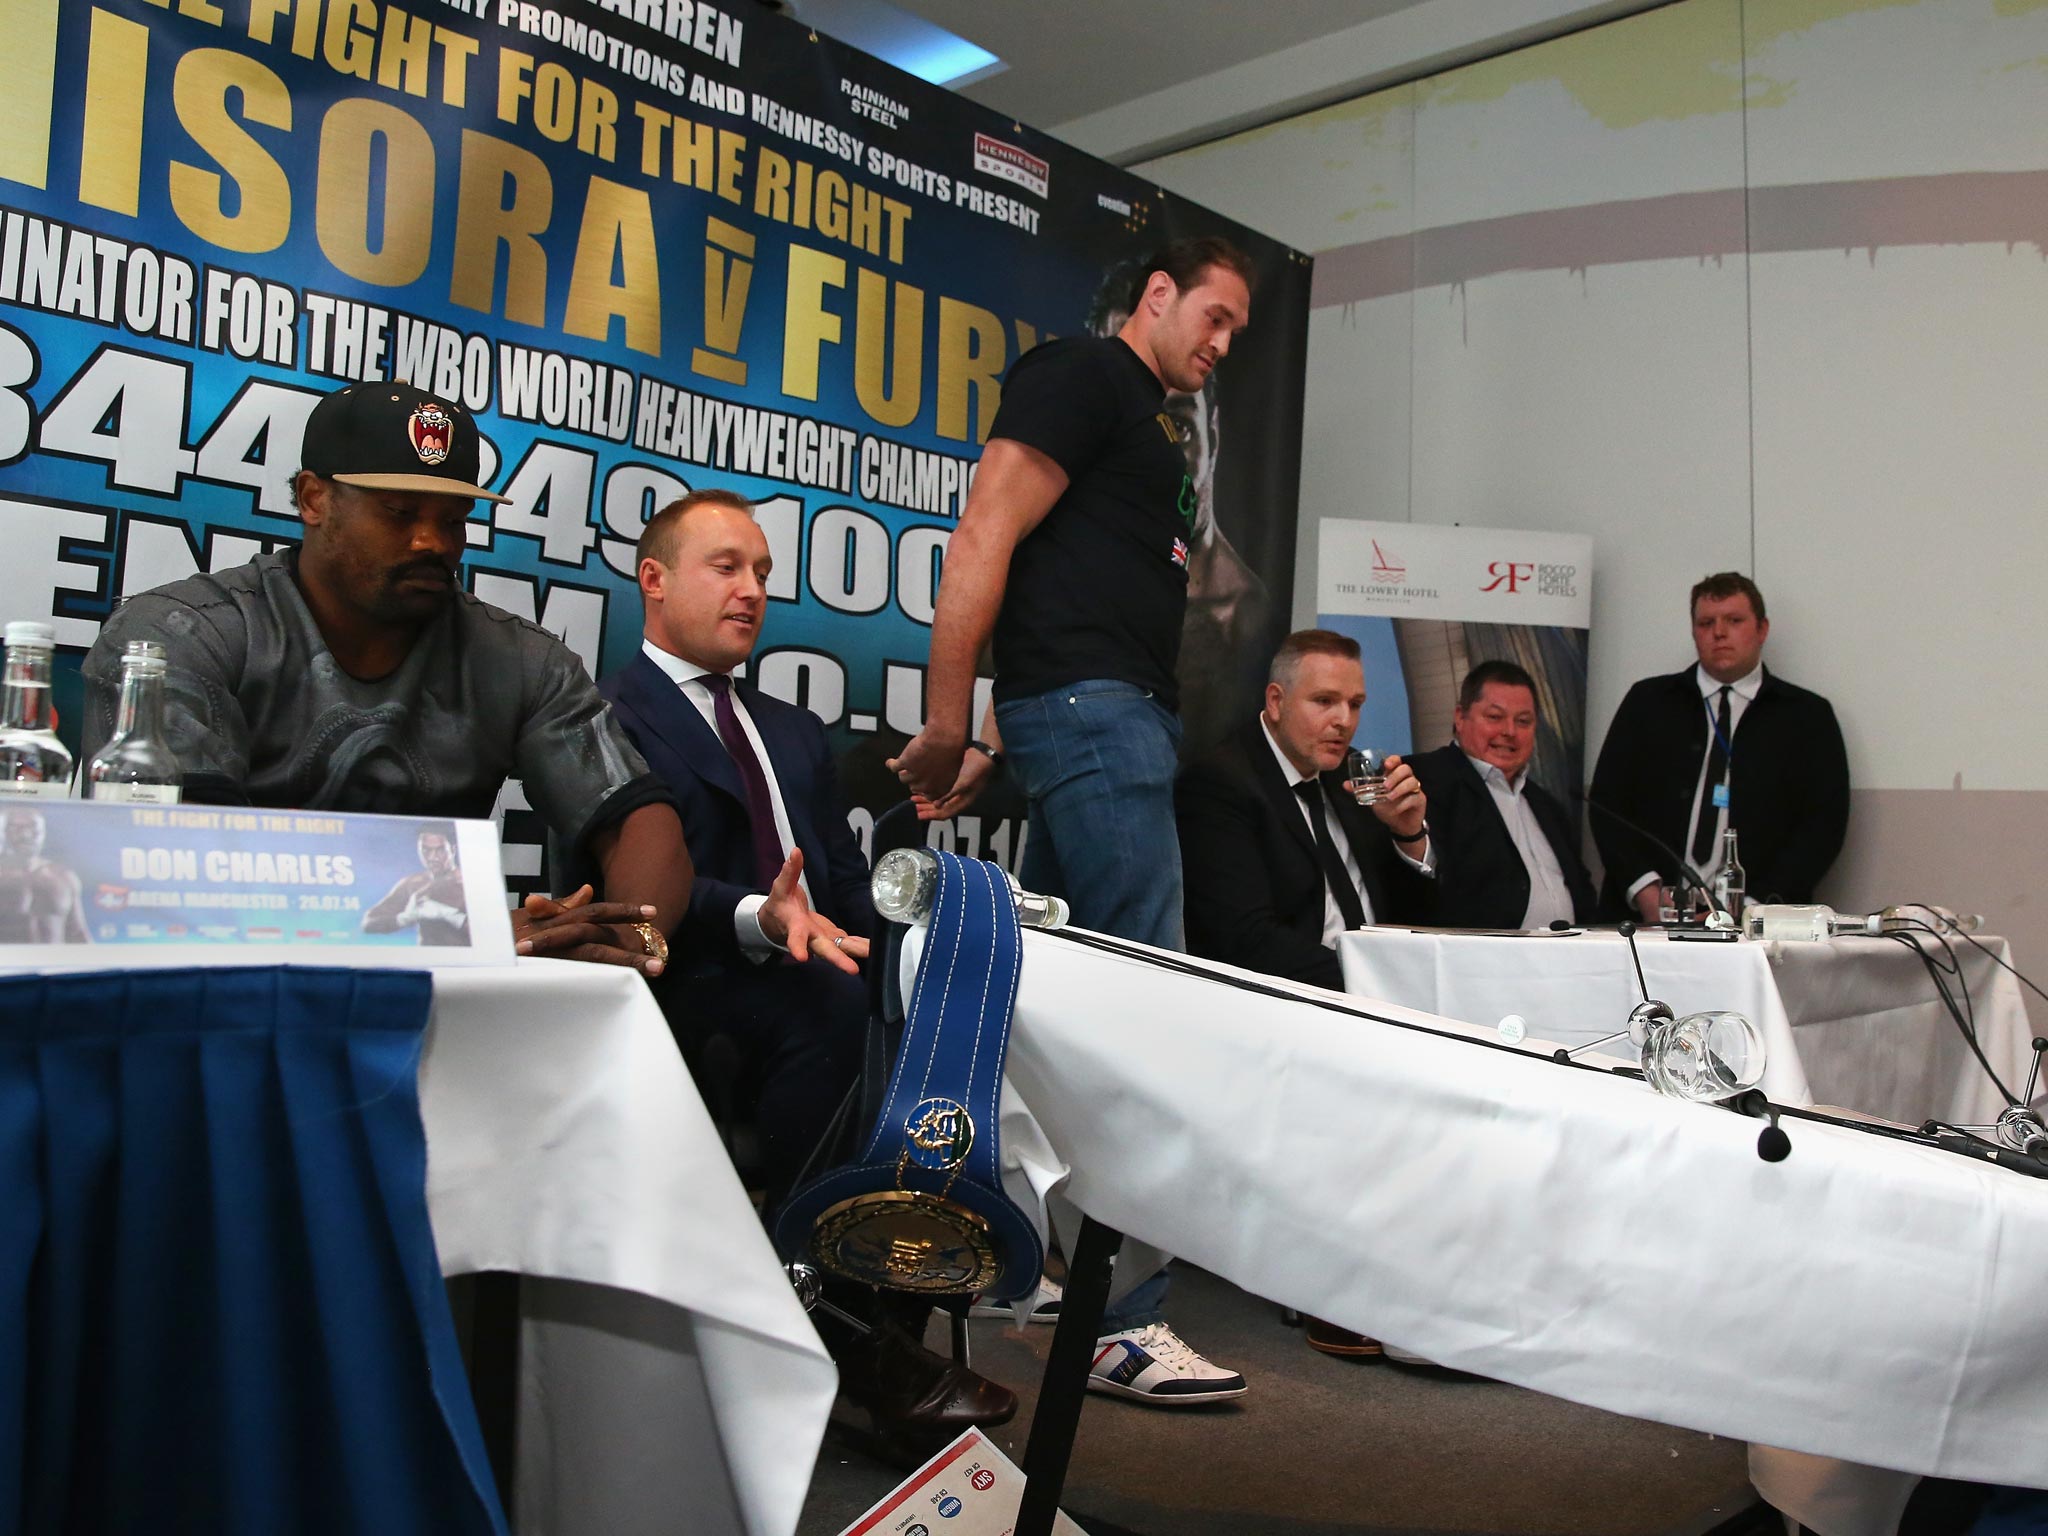 Tyson Fury storms out of press conference after flipping a table and a foul-mouthed tirade as Dereck Chisora looks on